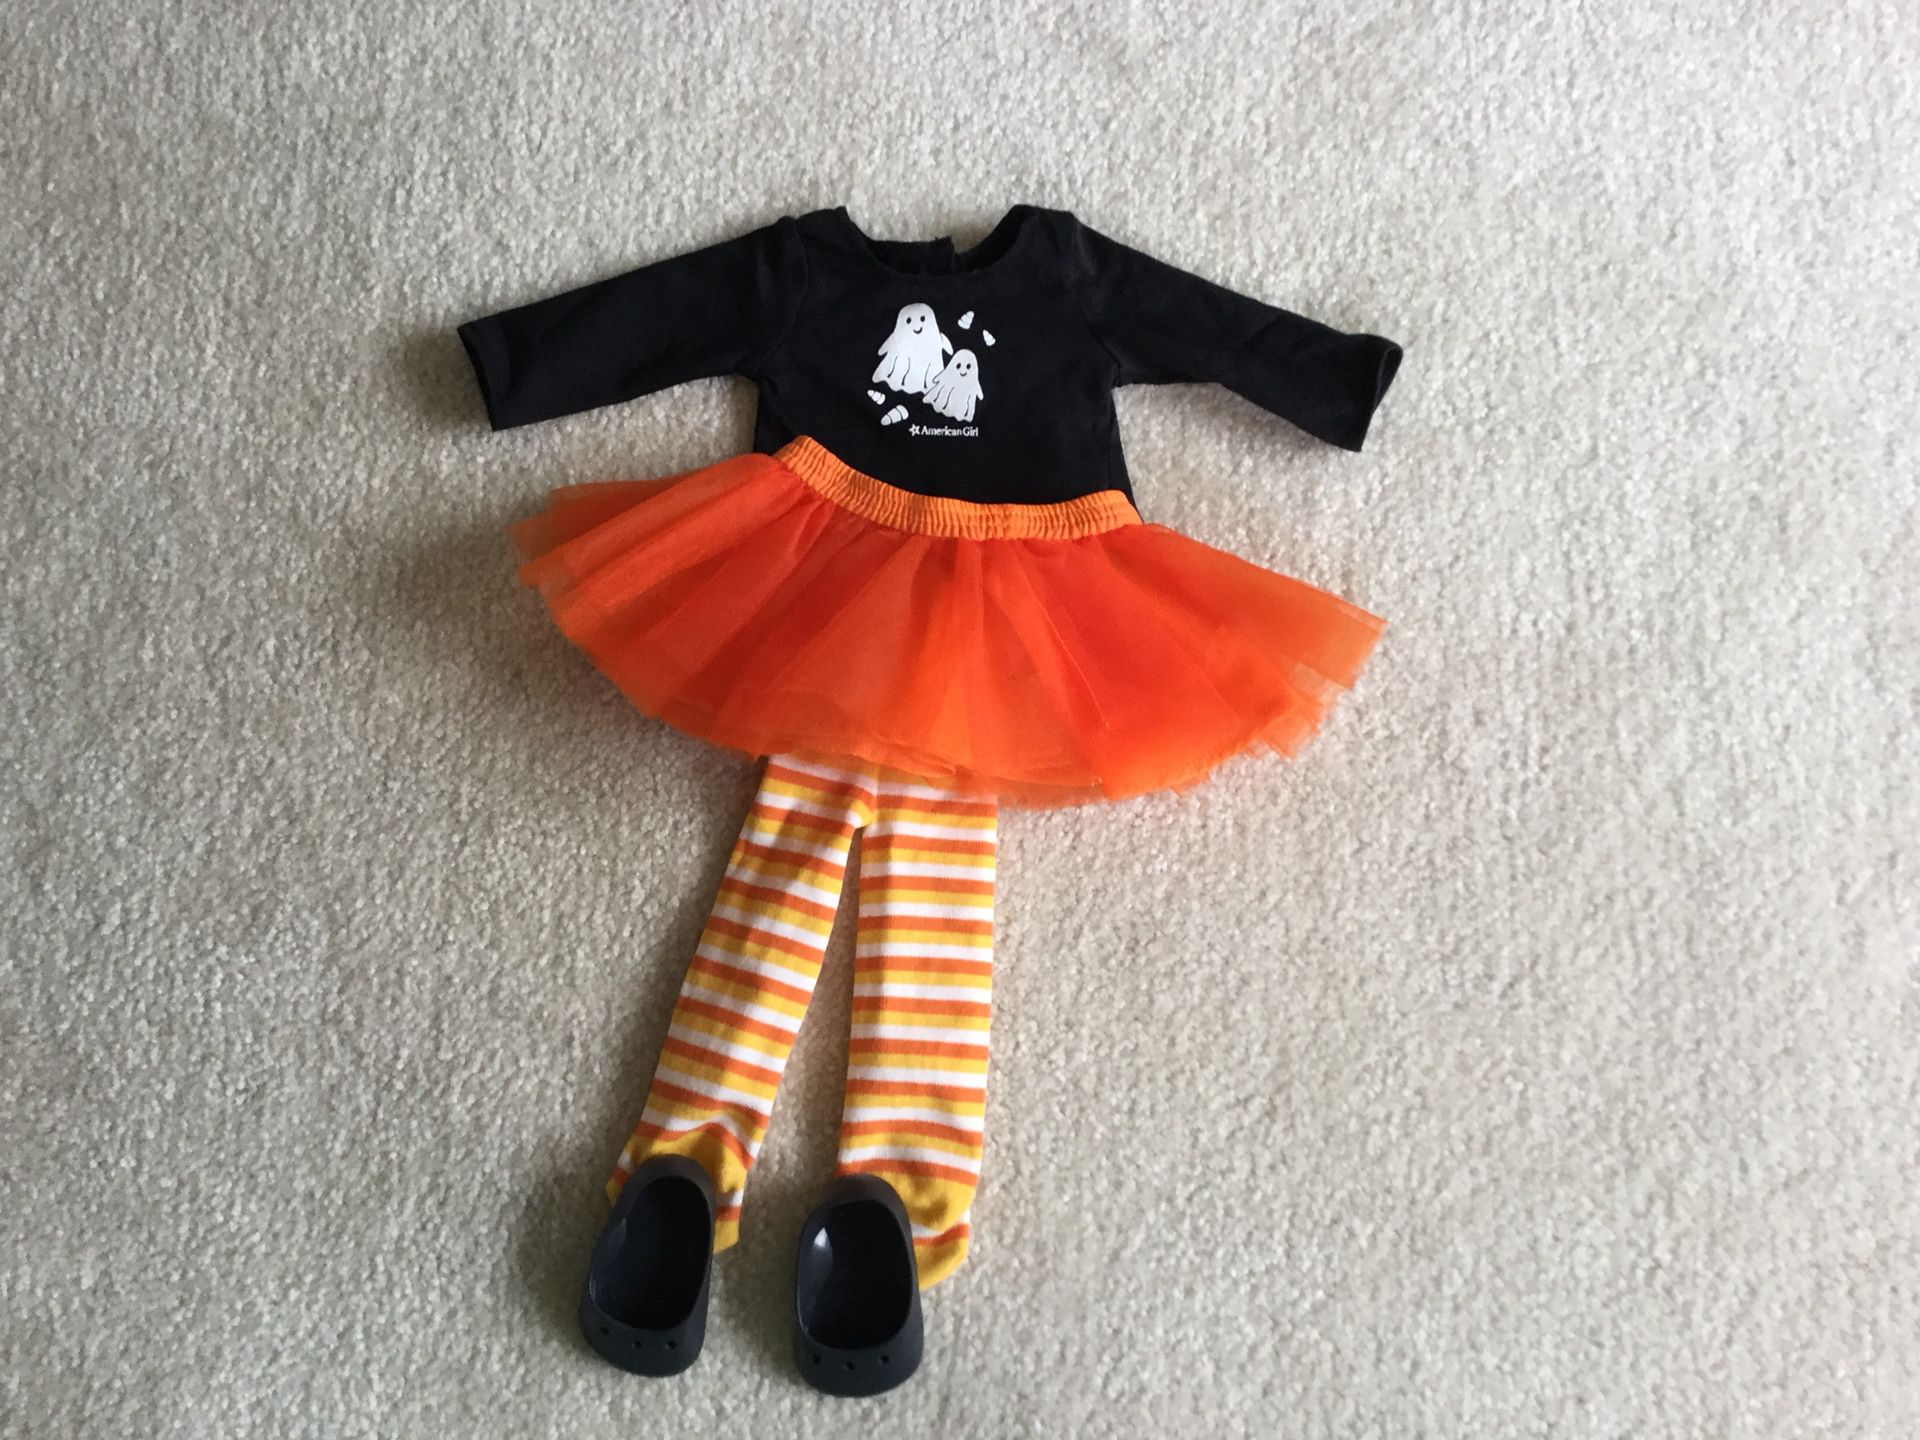 American Girl Doll - Halloween outfit